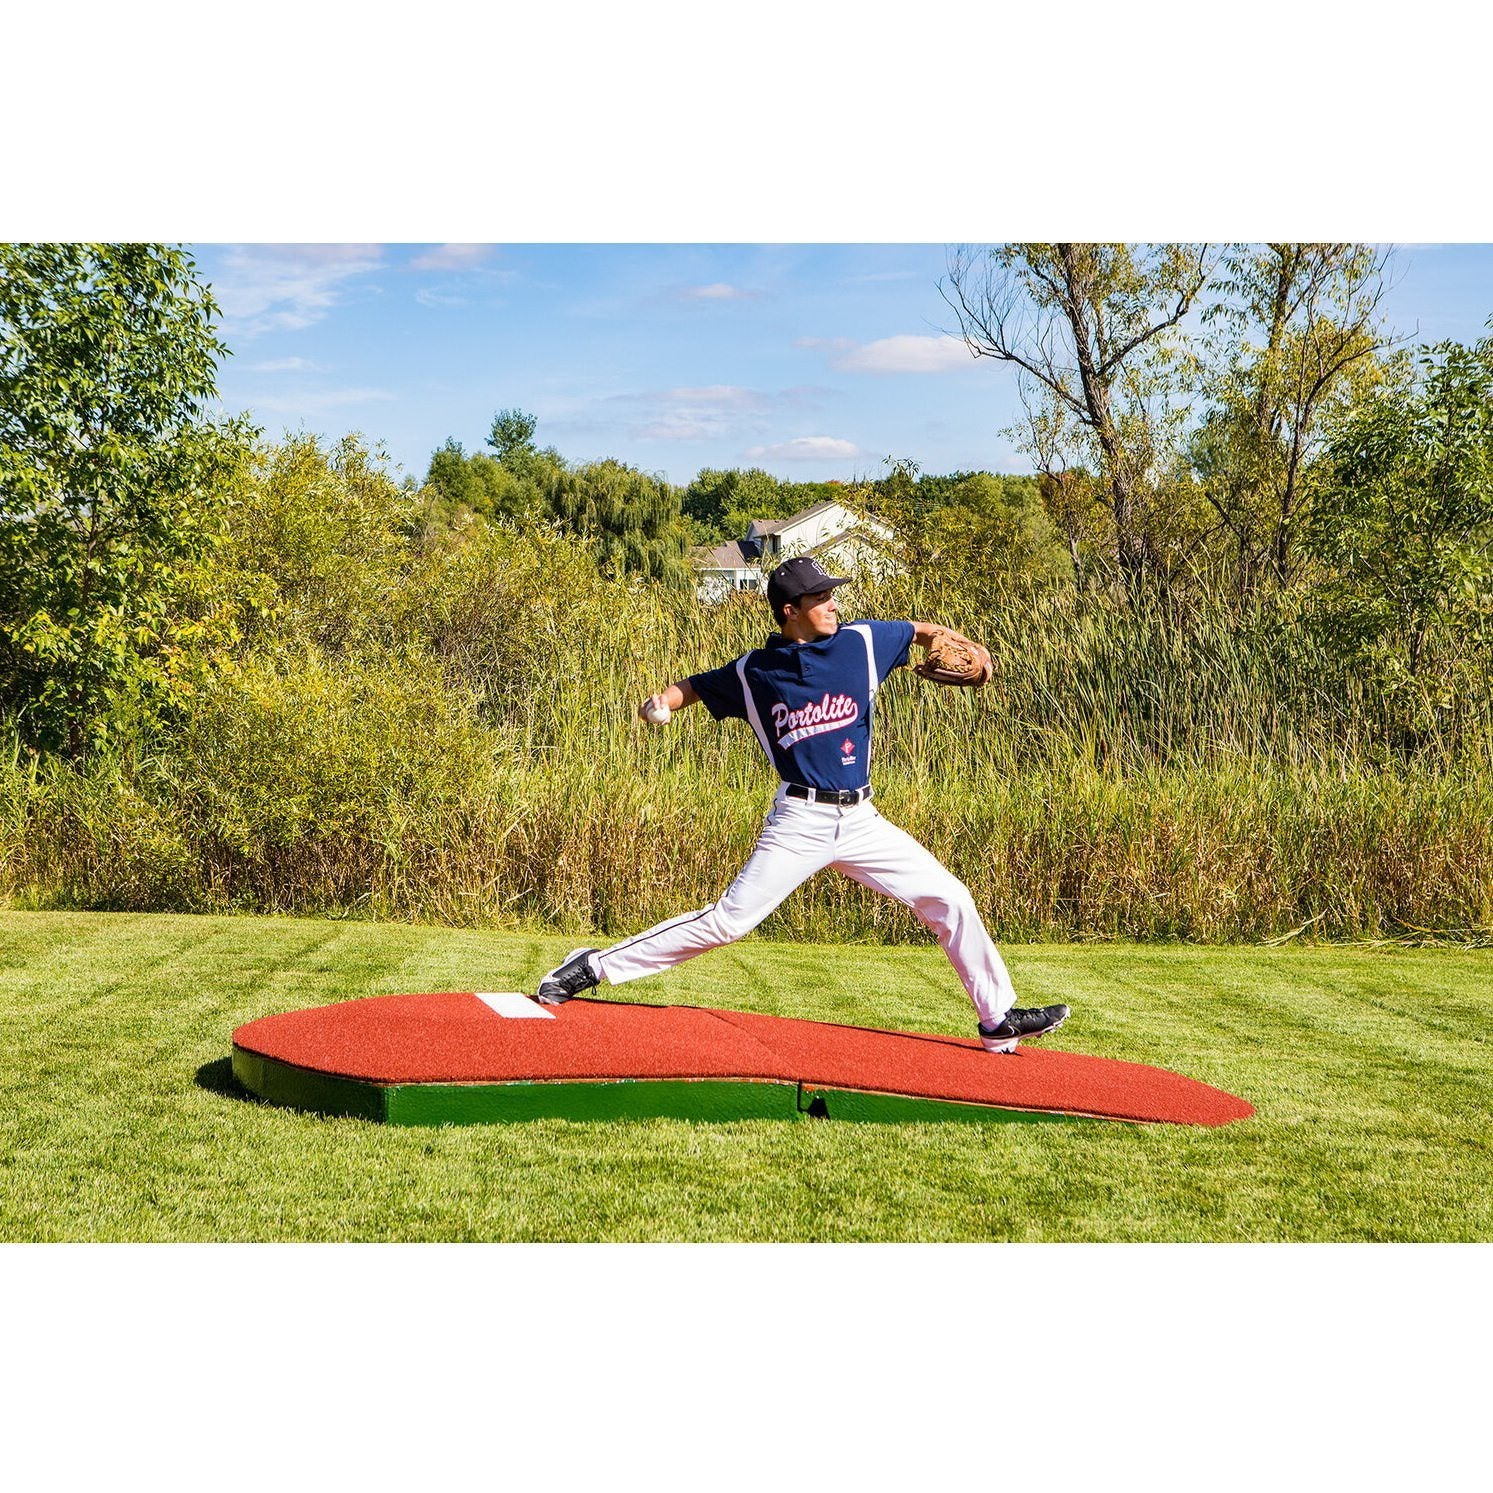 Portolite 10" Full Size 2-Piece Portable Practice Pitching Mound red pitcher stride